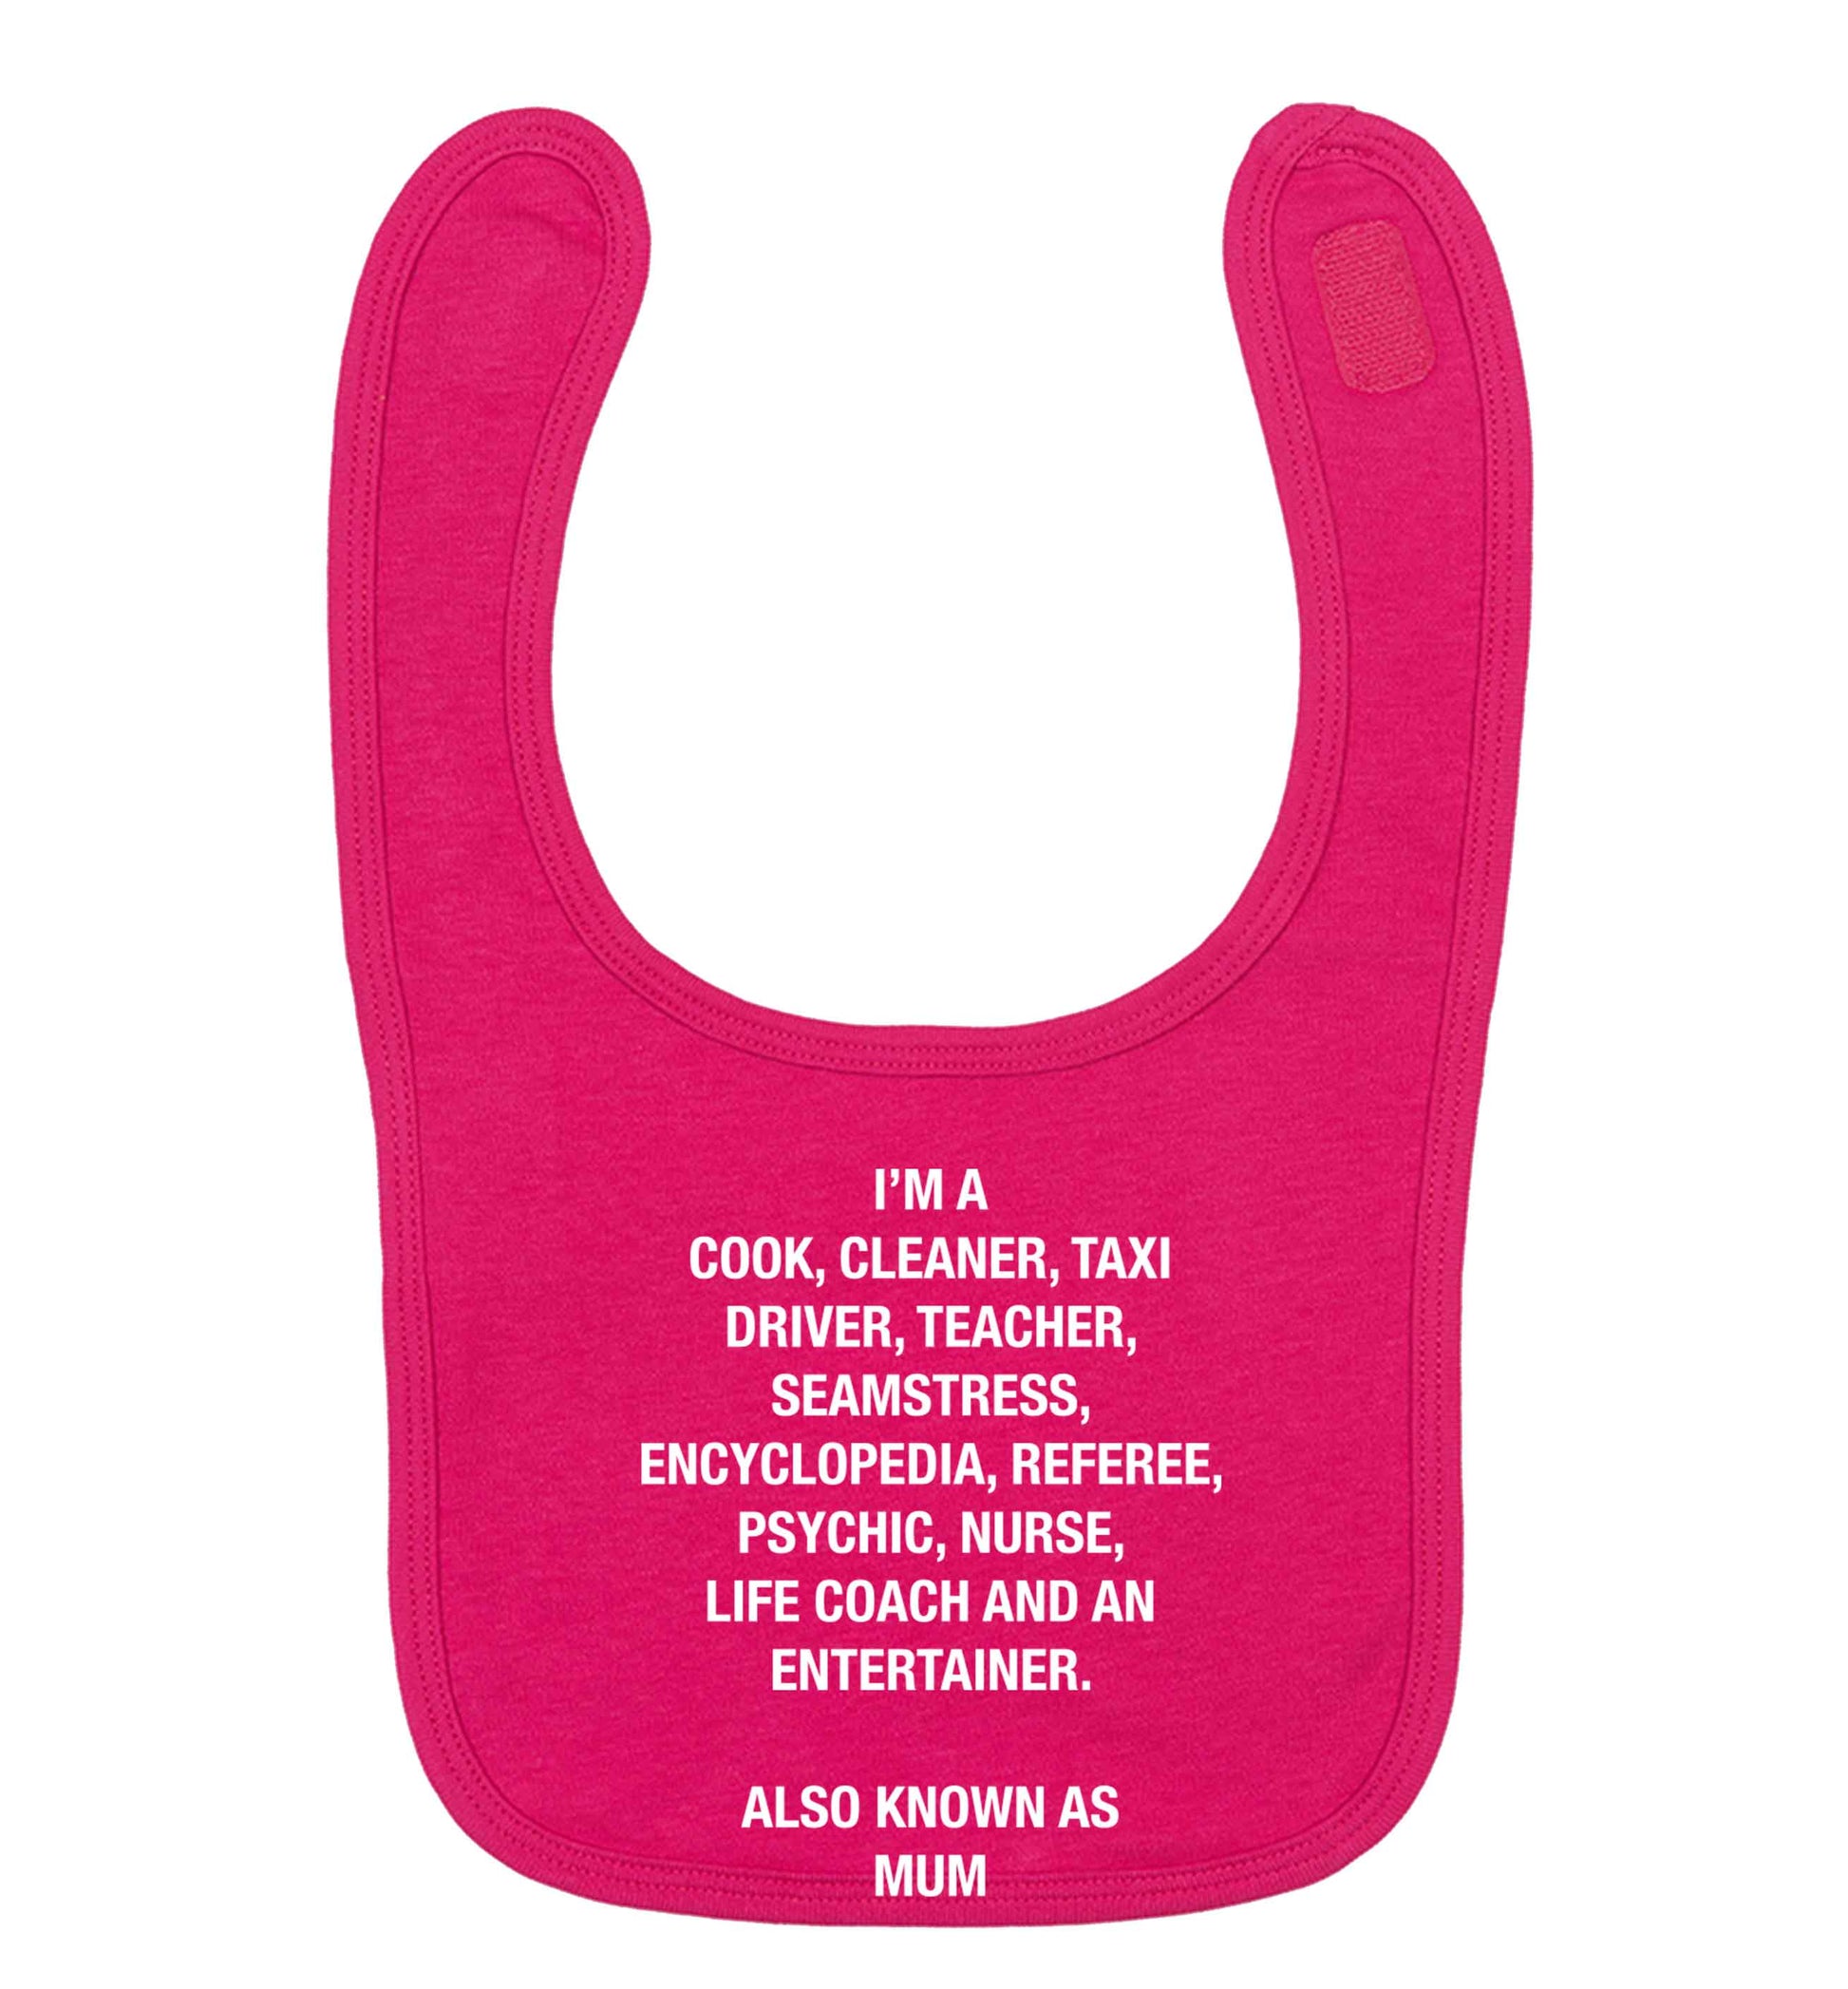 Funny gifts for your mum on mother's dayor her birthday! Mum, cook, cleaner, taxi driver, teacher, seamstress, encyclopedia, referee, psychic, nurse, life coach and entertainer dark pink baby bib